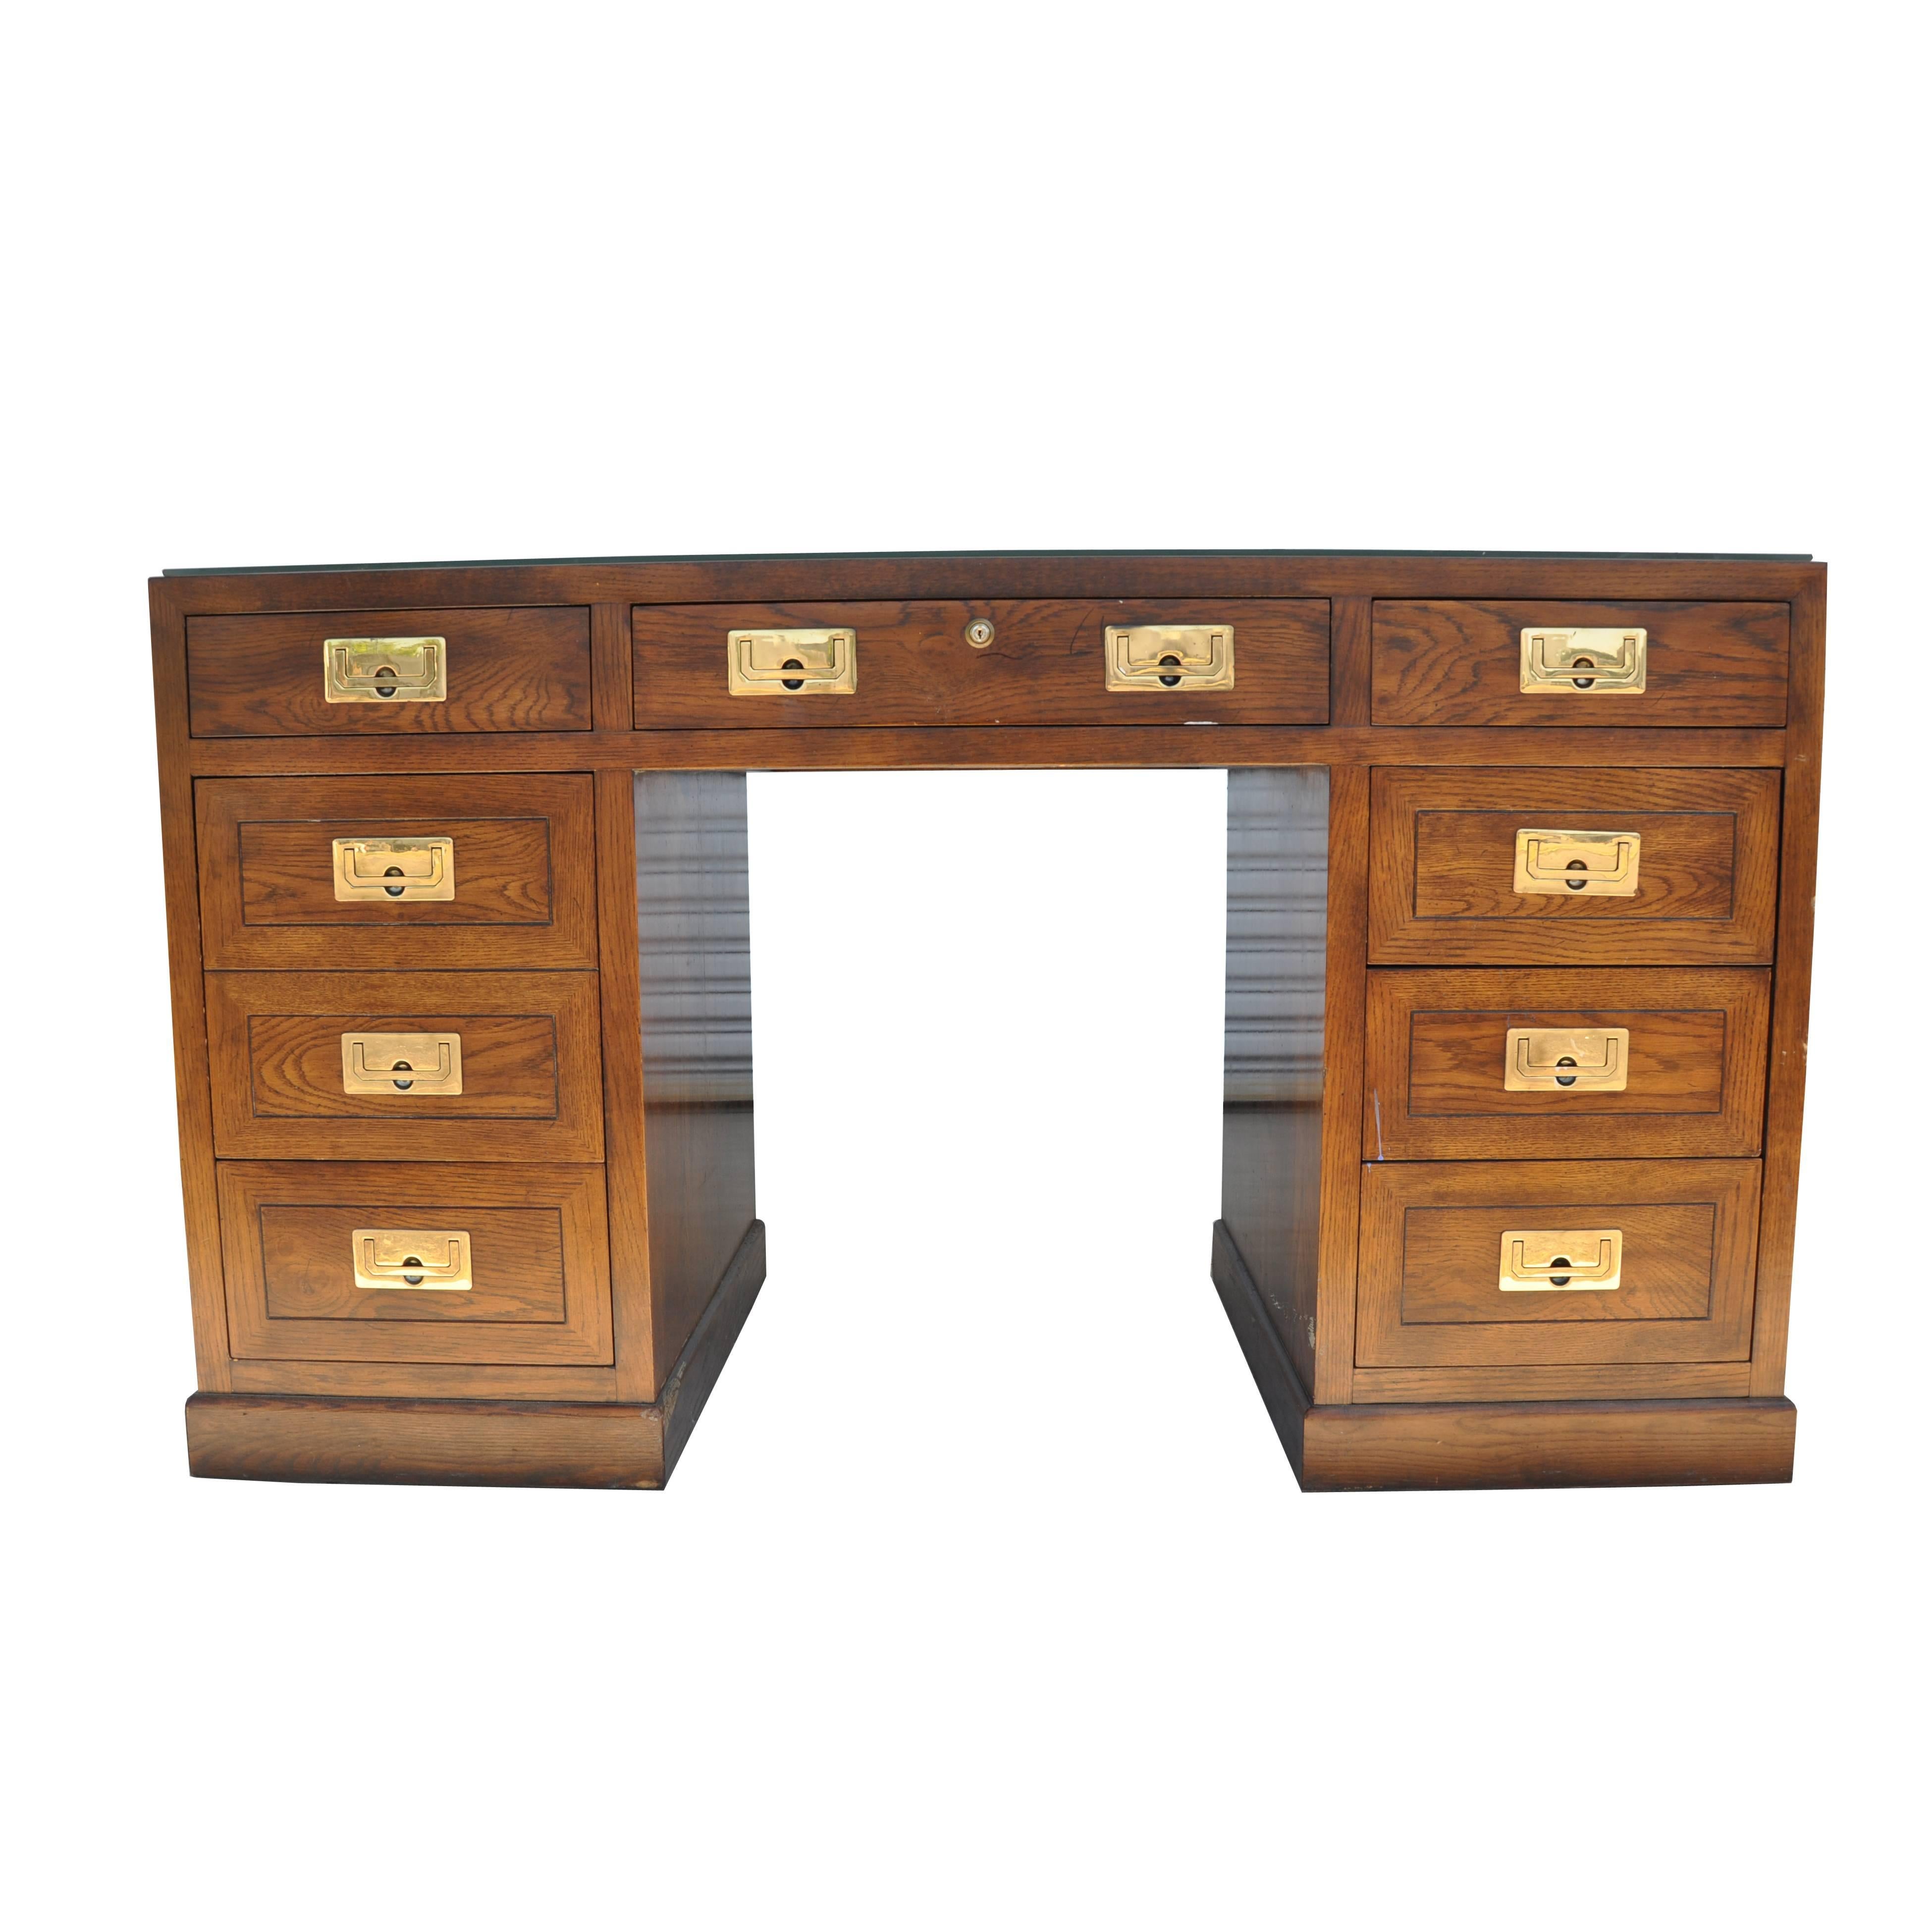 Mid-Century Modern Campaign Desk with Brass Pulls by Henredon